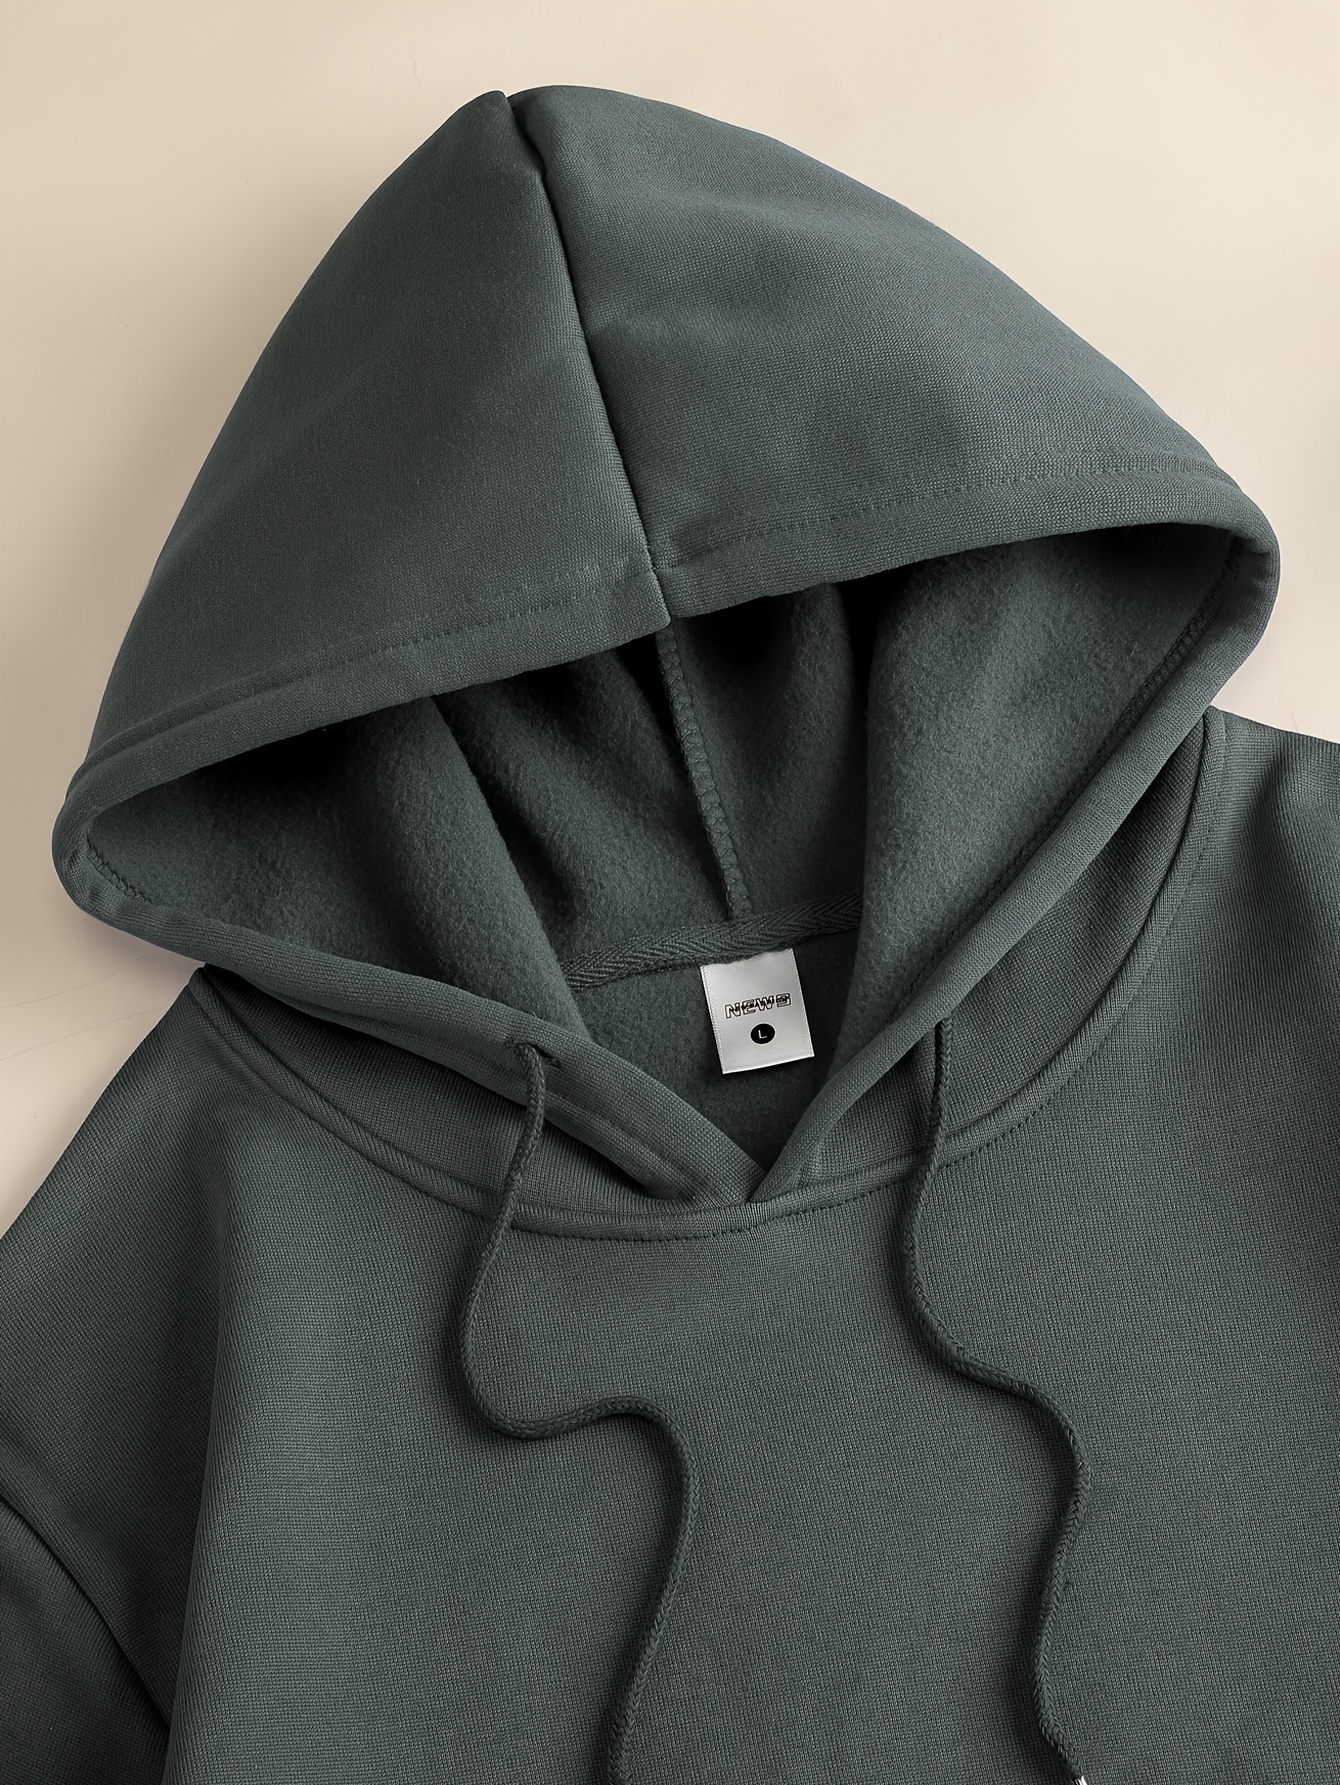 solid color hoodies for men hoodie with kangaroo pocket comfy loose trendy hooded pullover mens clothing for autumn winter details 3